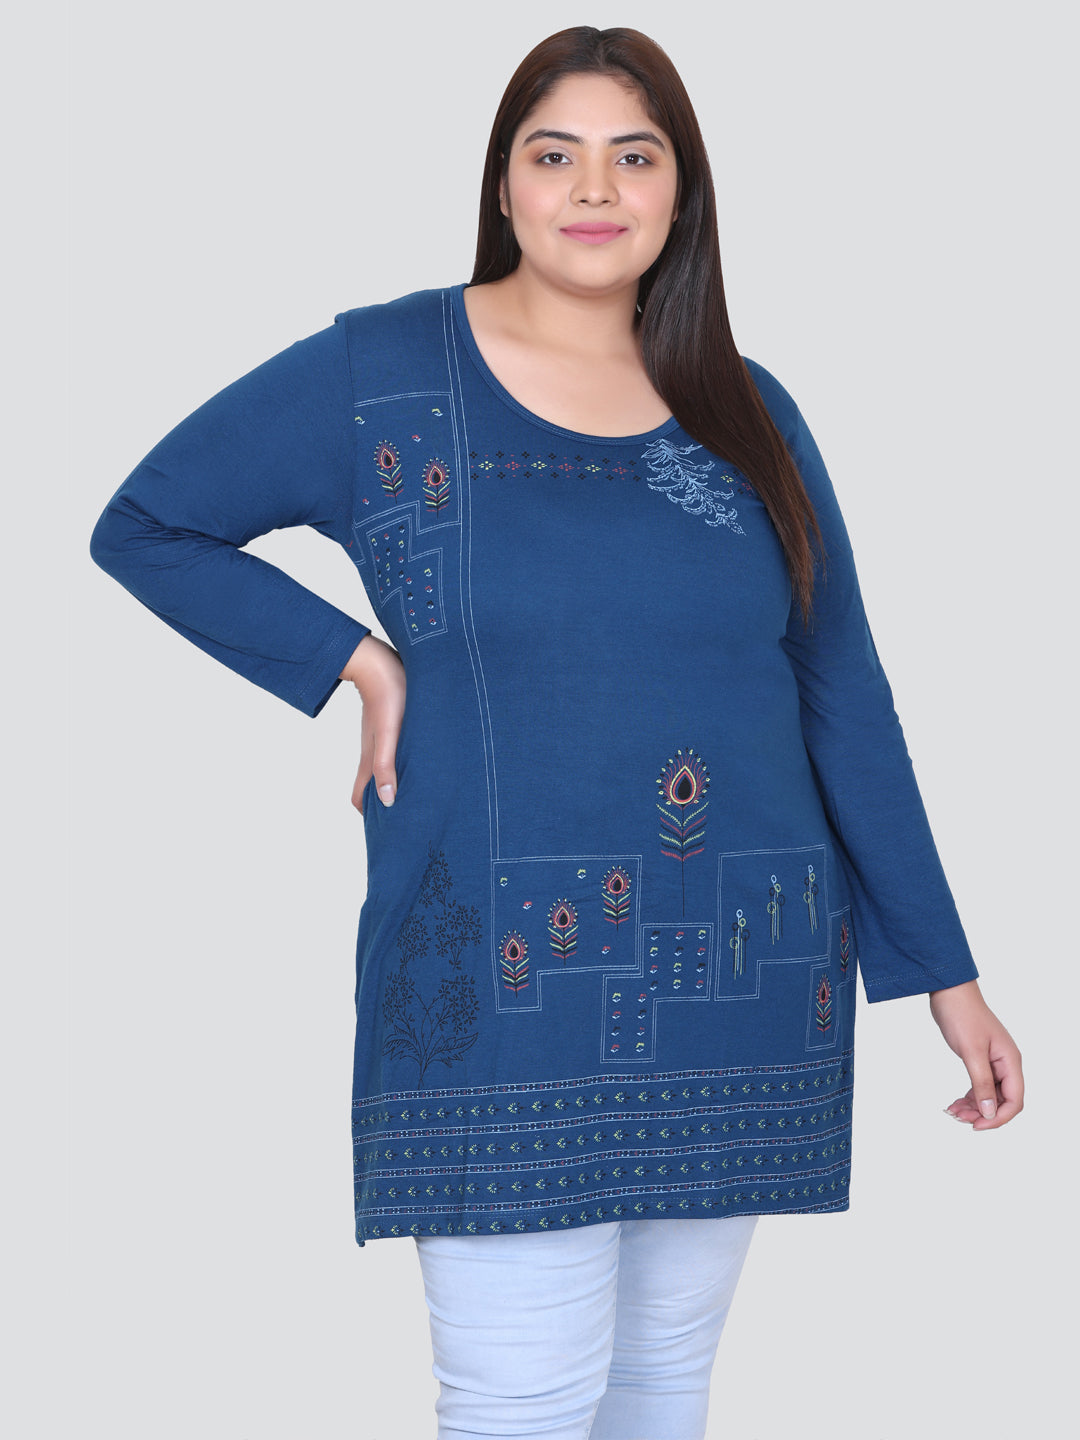 Cotton Long Top for Women Plus Size - Full Sleeves - Teal Blue